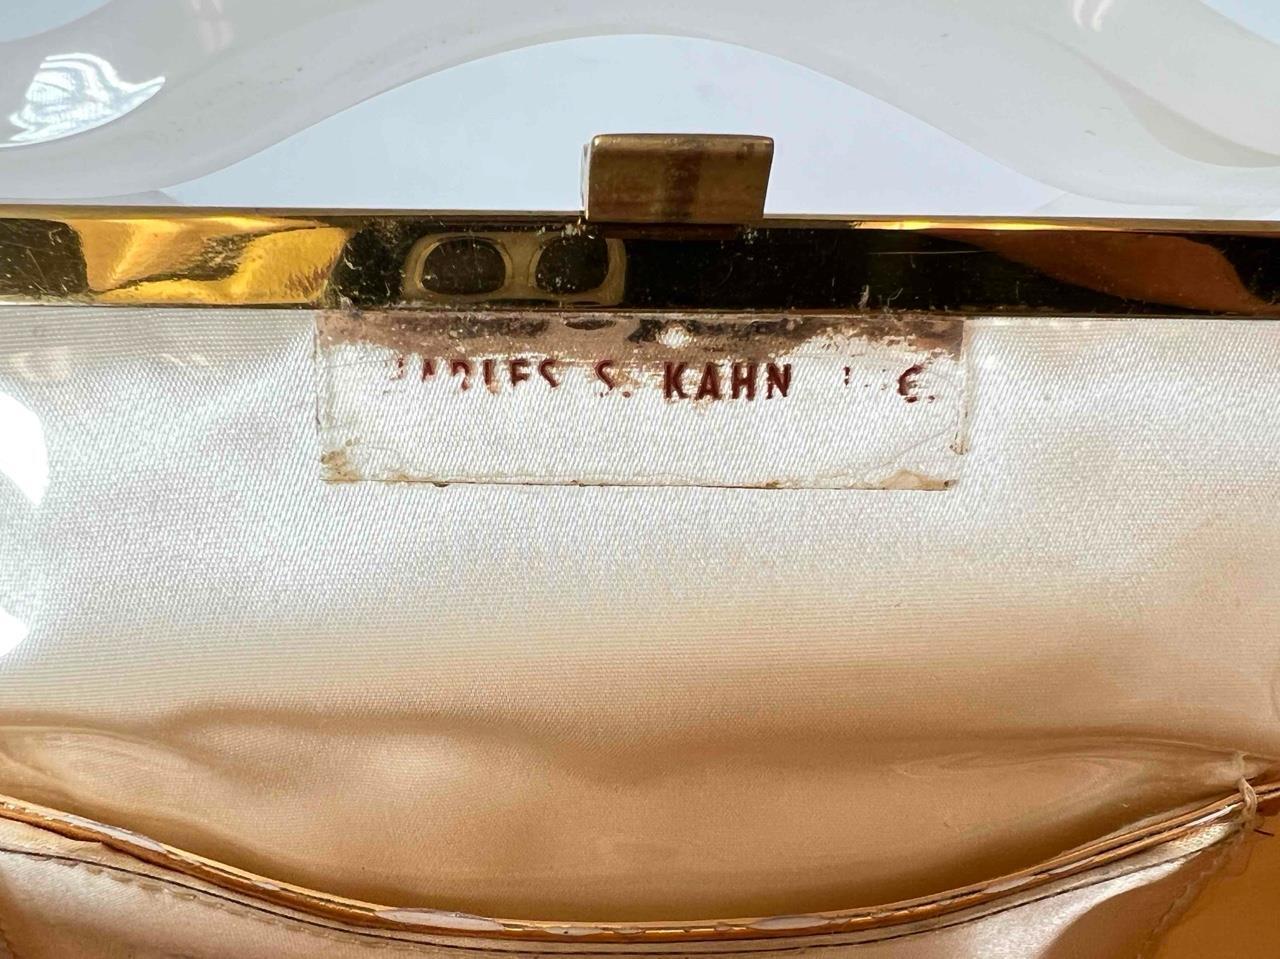 Past auction: Two Charles Jourdan leather purses 1980s | June 7, 2007